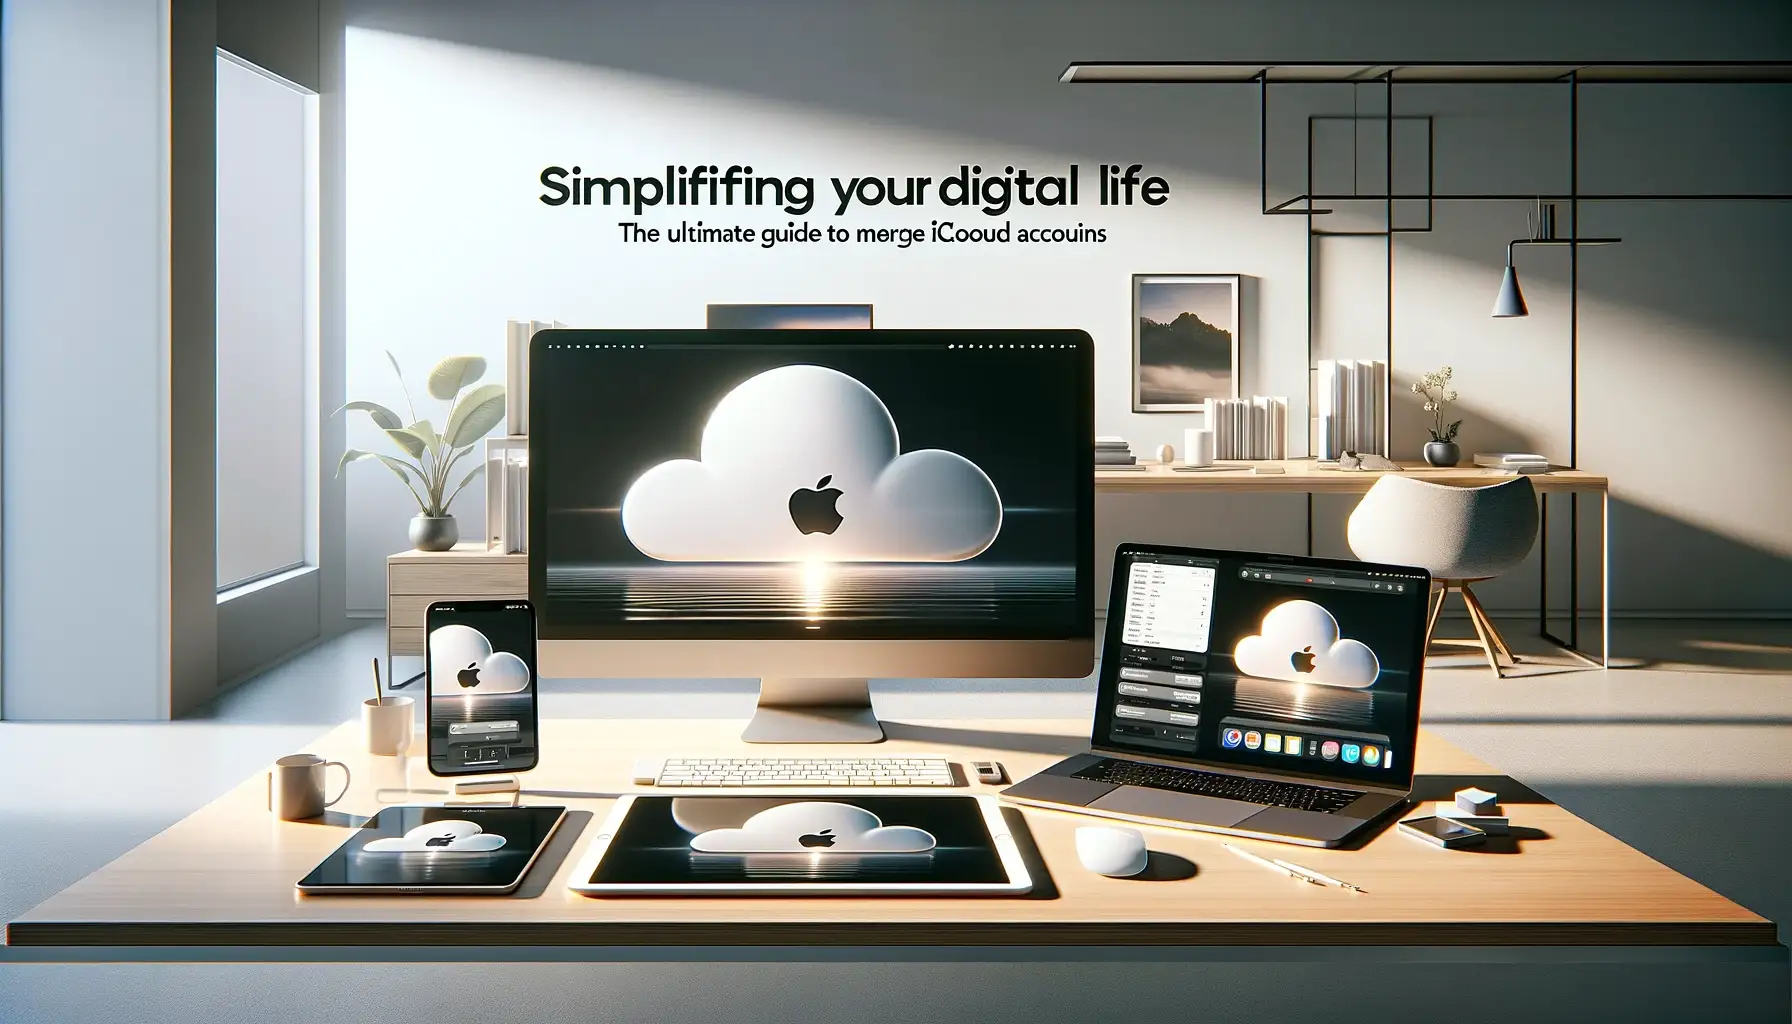 Simplifying Your Digital Life: The Ultimate Guide to Merge iCloud Accounts